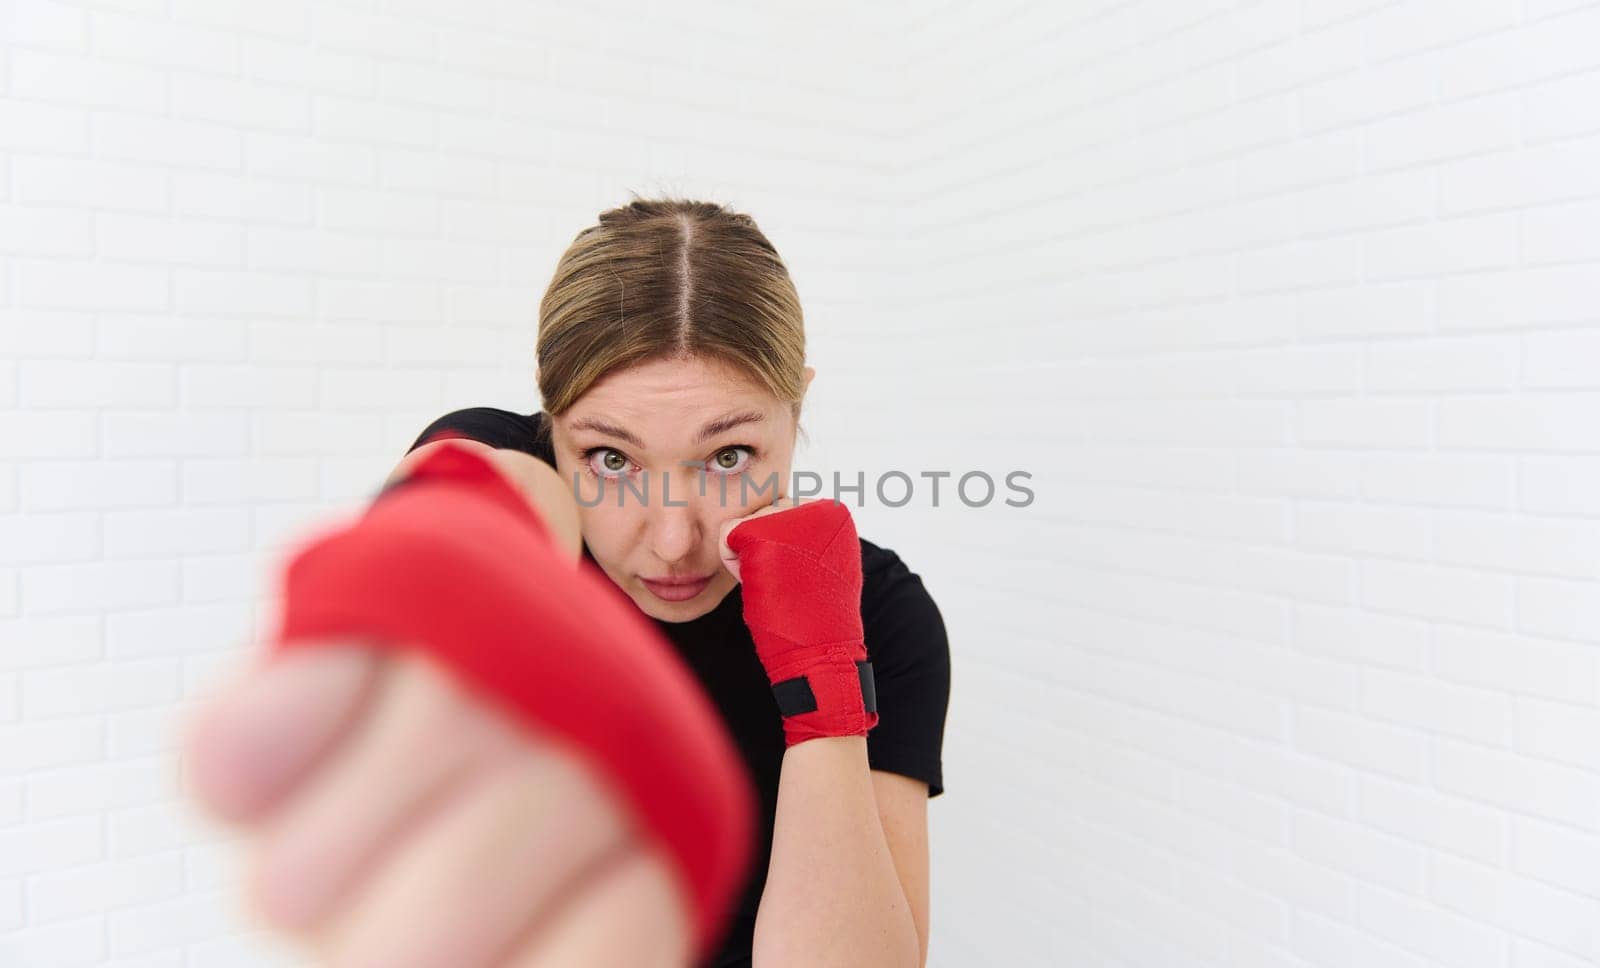 European blonde confident determined female boxer wearing boxing gloves, practicing punching forward the camera, isolated on white background. Blurred fists of hands on the foreground. Copy ad space.